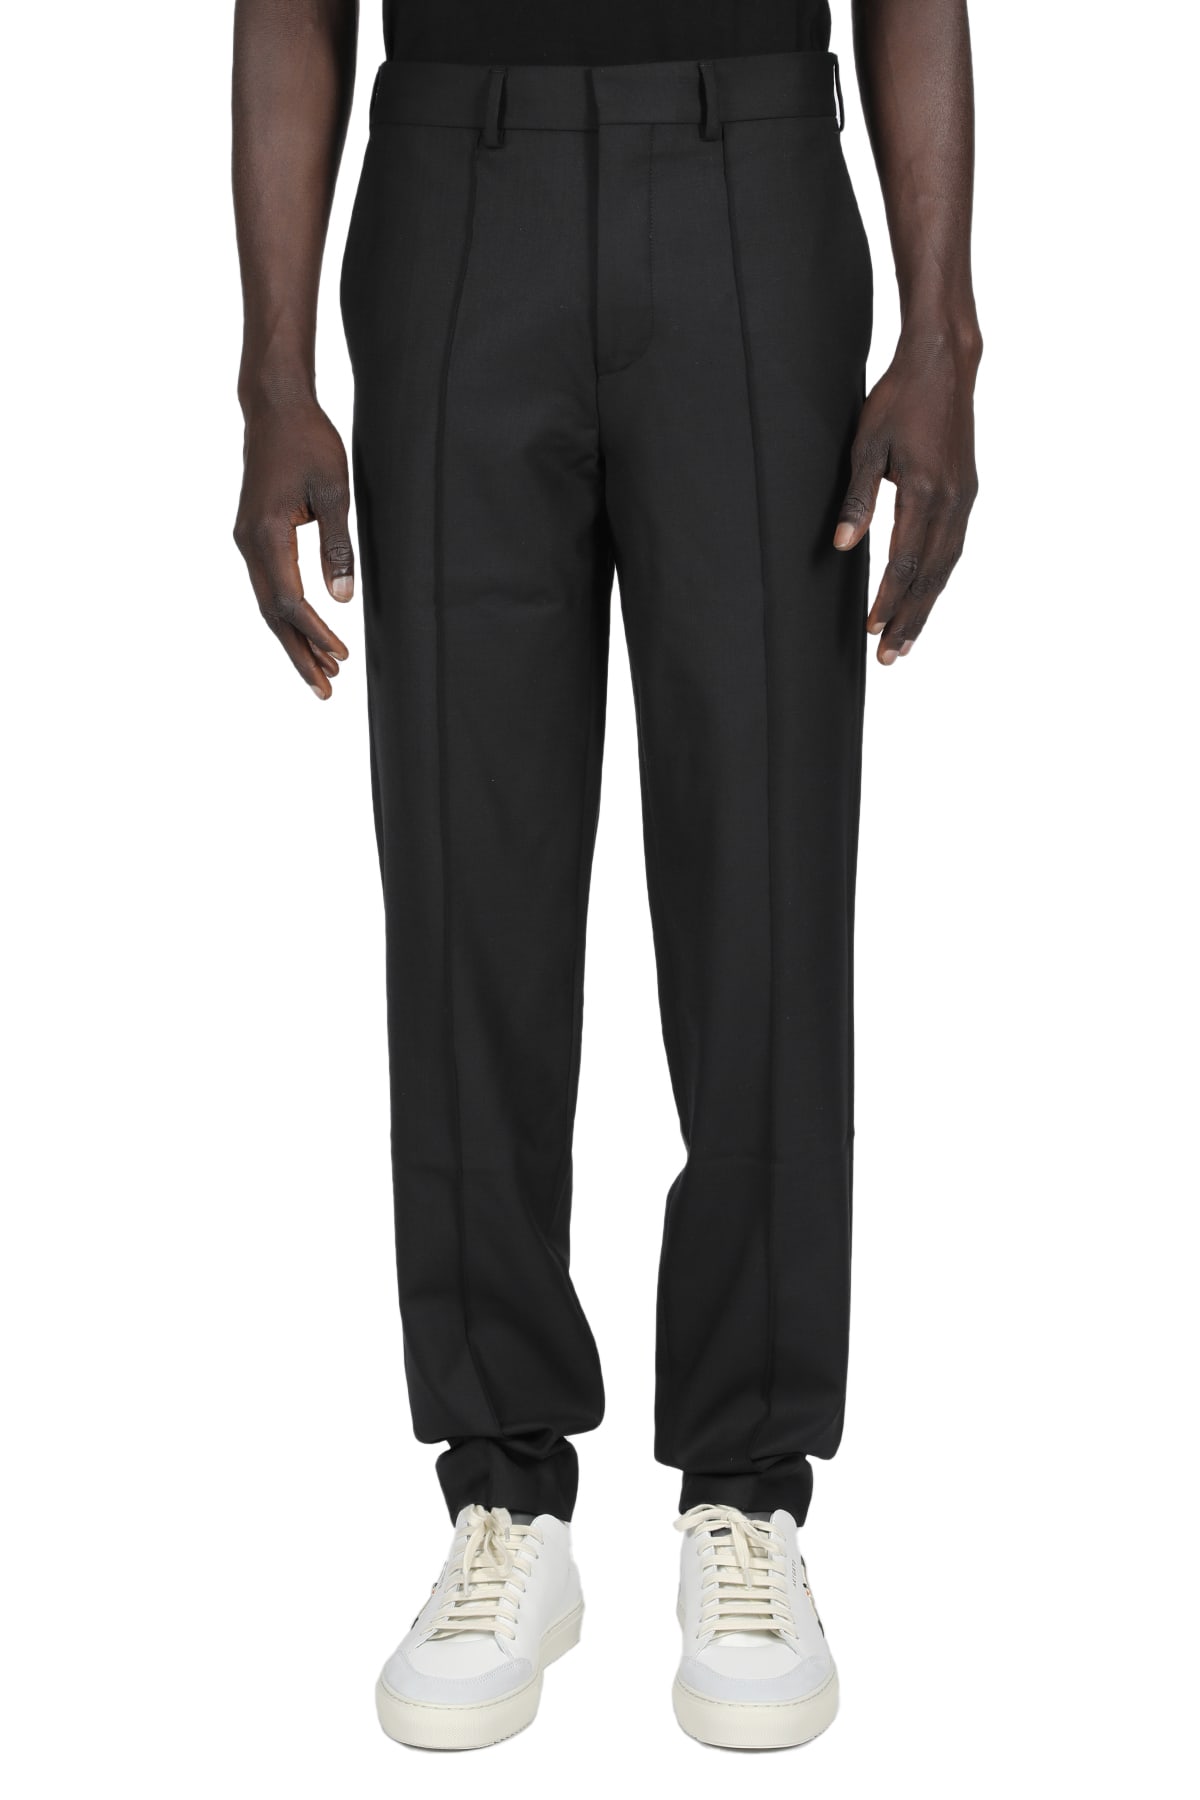 Axel Arigato Straight Fit Trousers